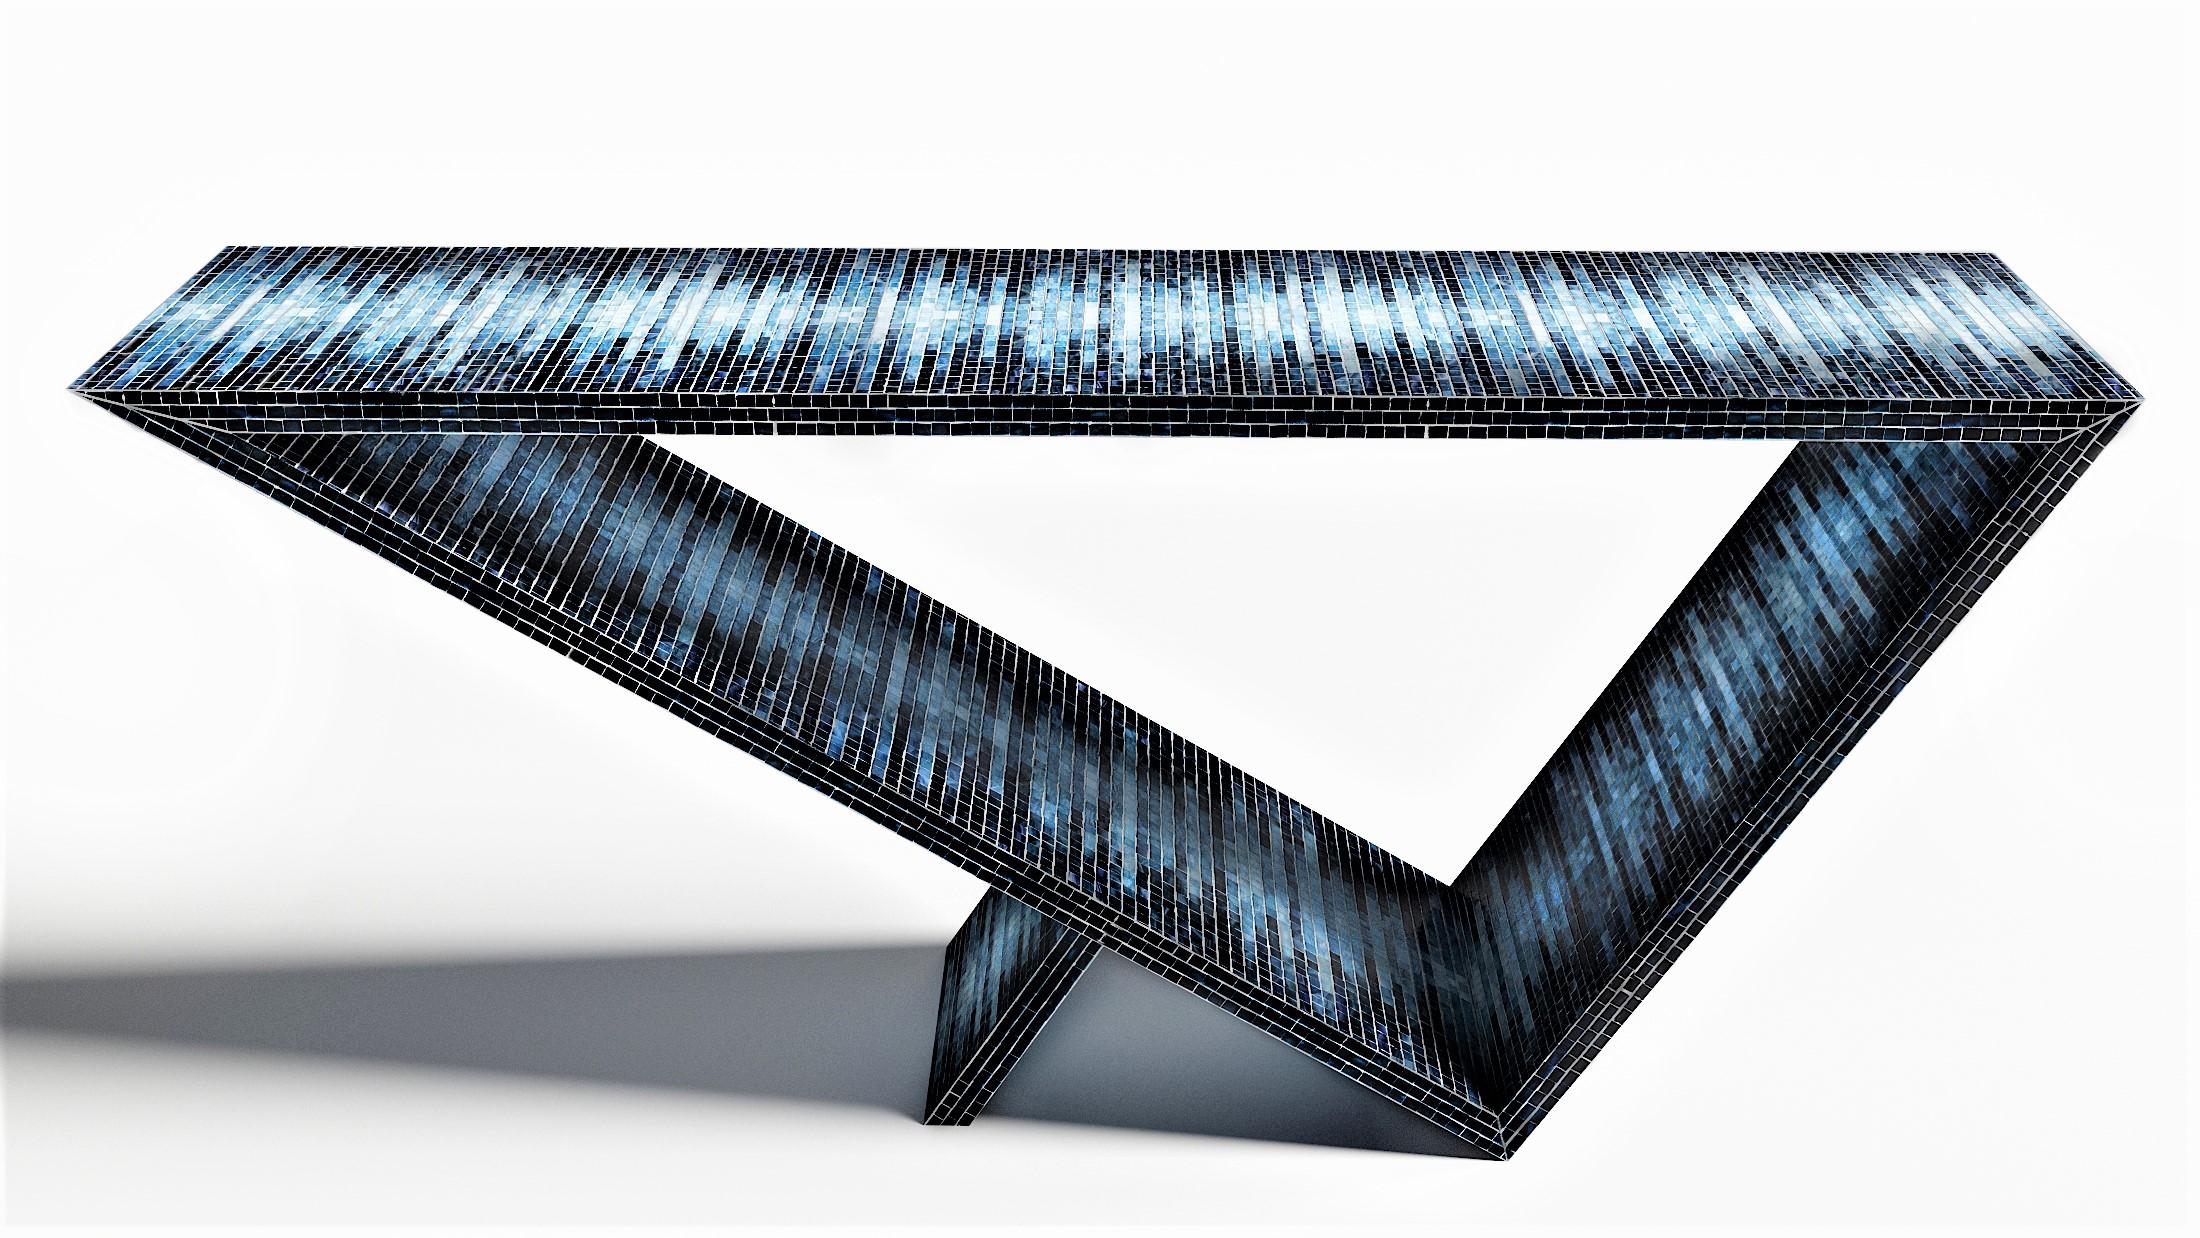 Time/space portal blue ombre console #3 by Neal Aronowitz Design
Dimensions: D 172.7 x W 43.2 x H 76.2 cm
Materials: Glass tile mosaic.
This table can be fabricated in any custom mosaic color and pattern. Also available in different sizes.